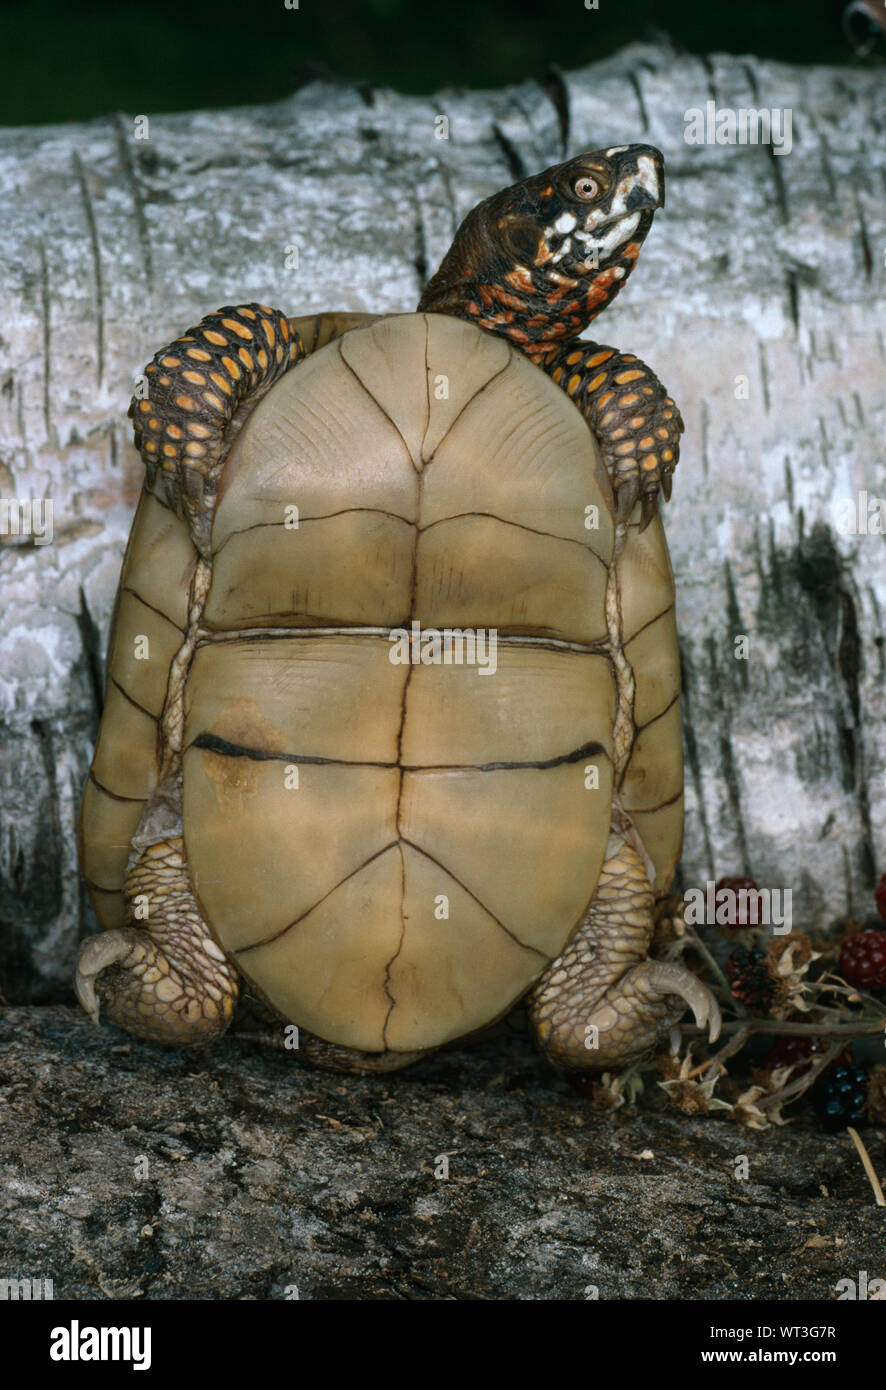 THREE-TOED BOX TURTLE (Terrapene carolina triunguis}. Positioned to show the underside (plastron) showing the midway hinge across the ventral surface, Stock Photo